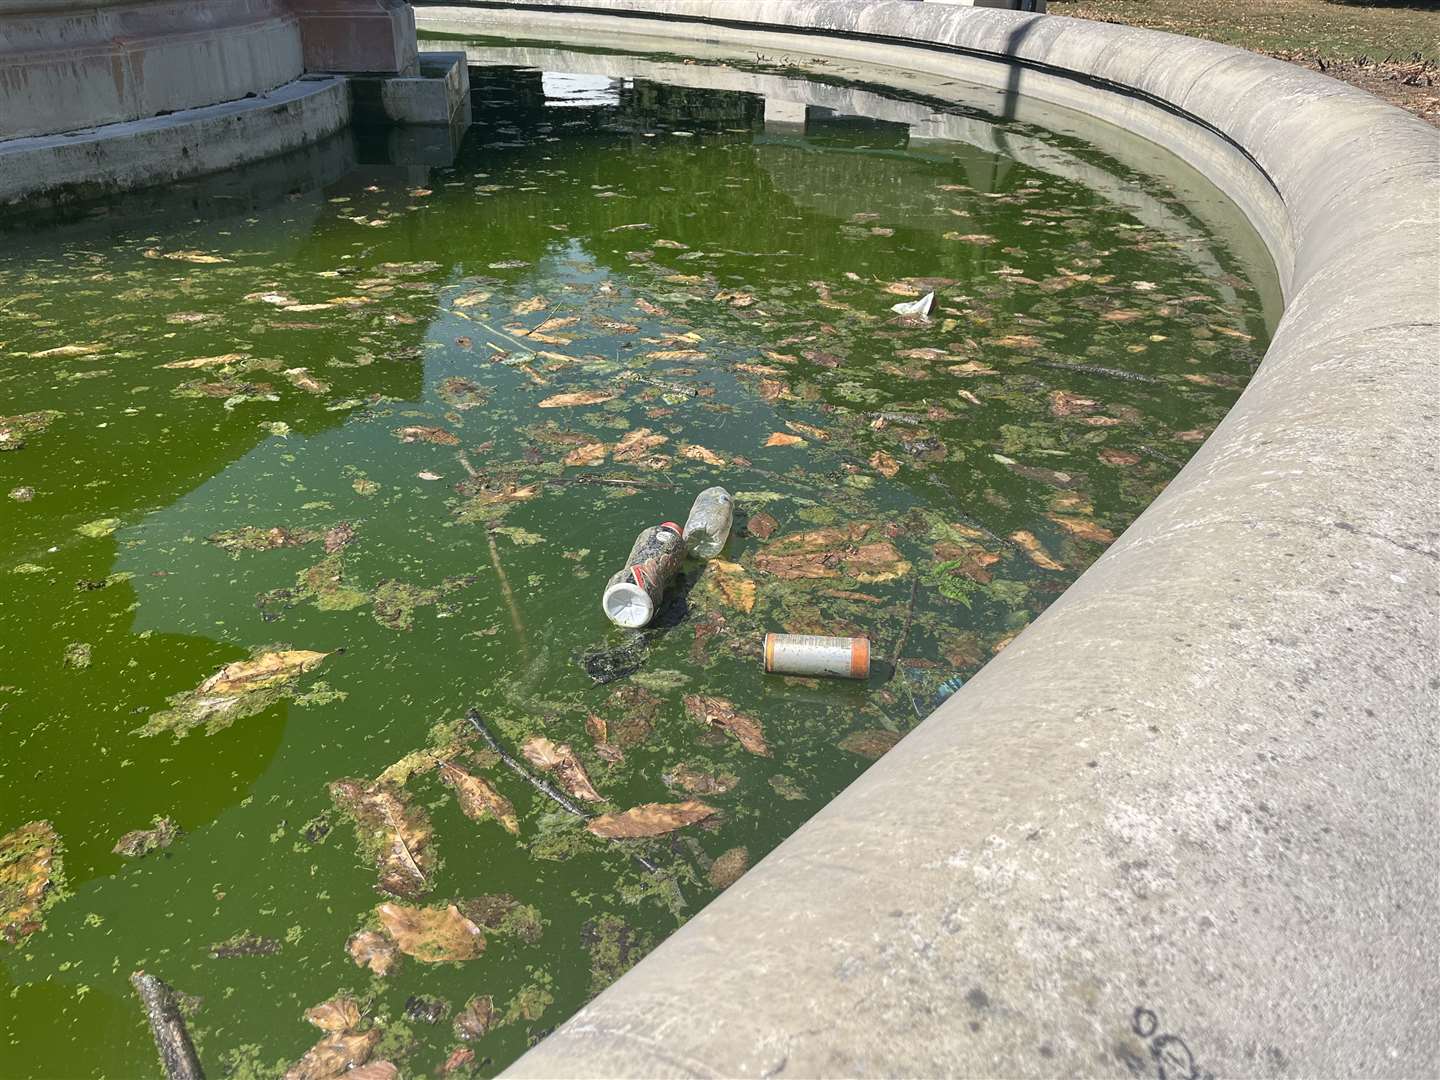 Rubbish pictured in the fountain earlier this week